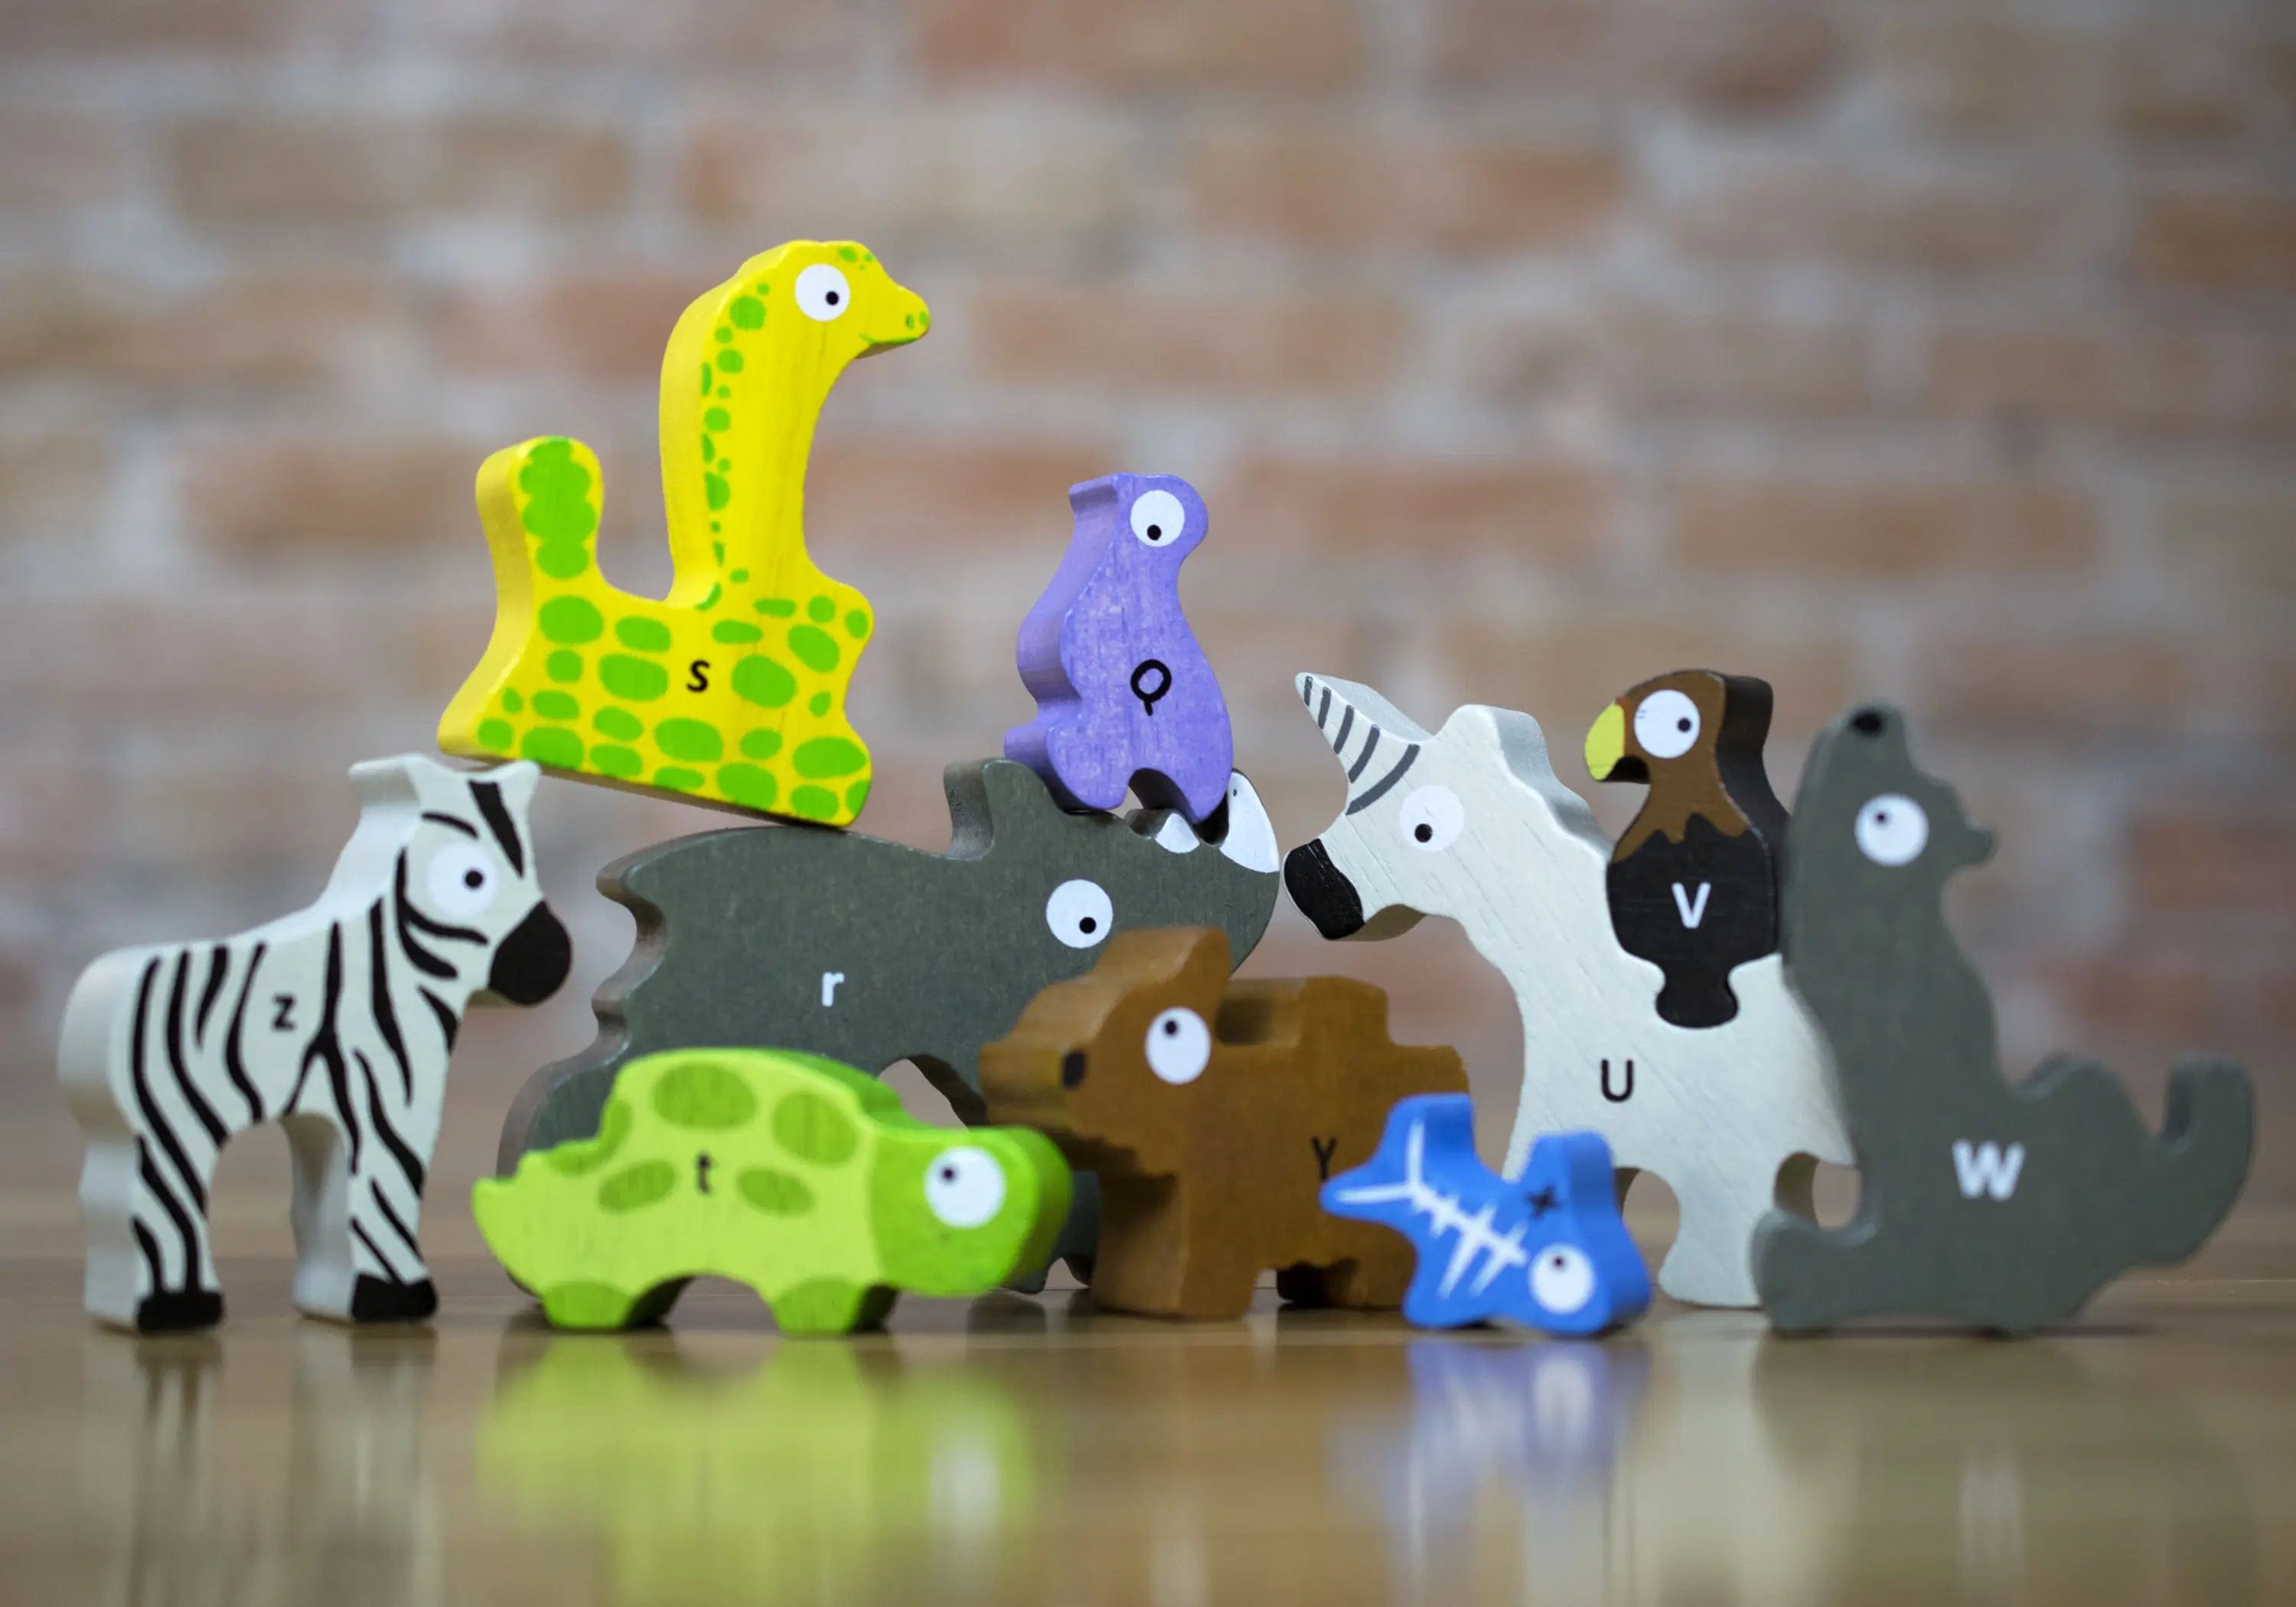 A-Z Wooden Animal Puzzle & Alphabet Toy in One!  Eco Friendly